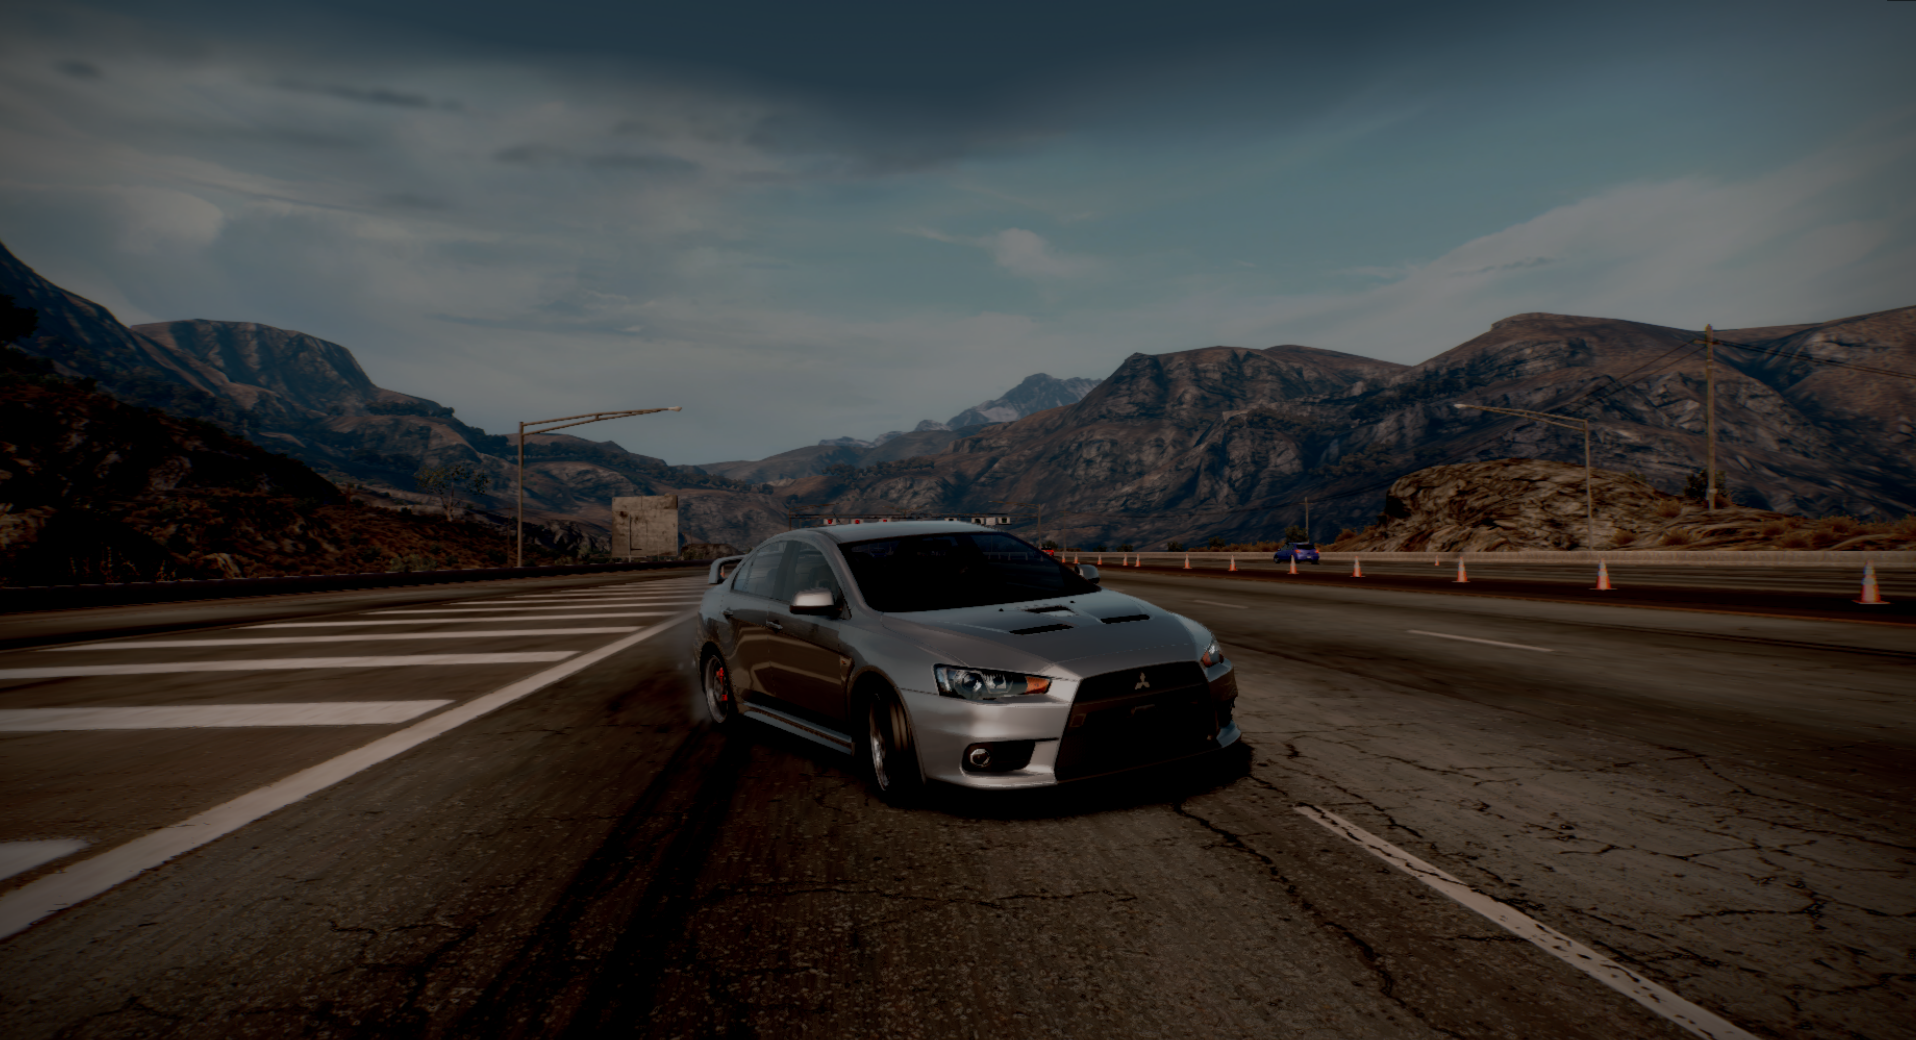 Mitsubishi Lancer EVO Need For Speed Hot Pursuit Vehicle Video Games 1916x1040